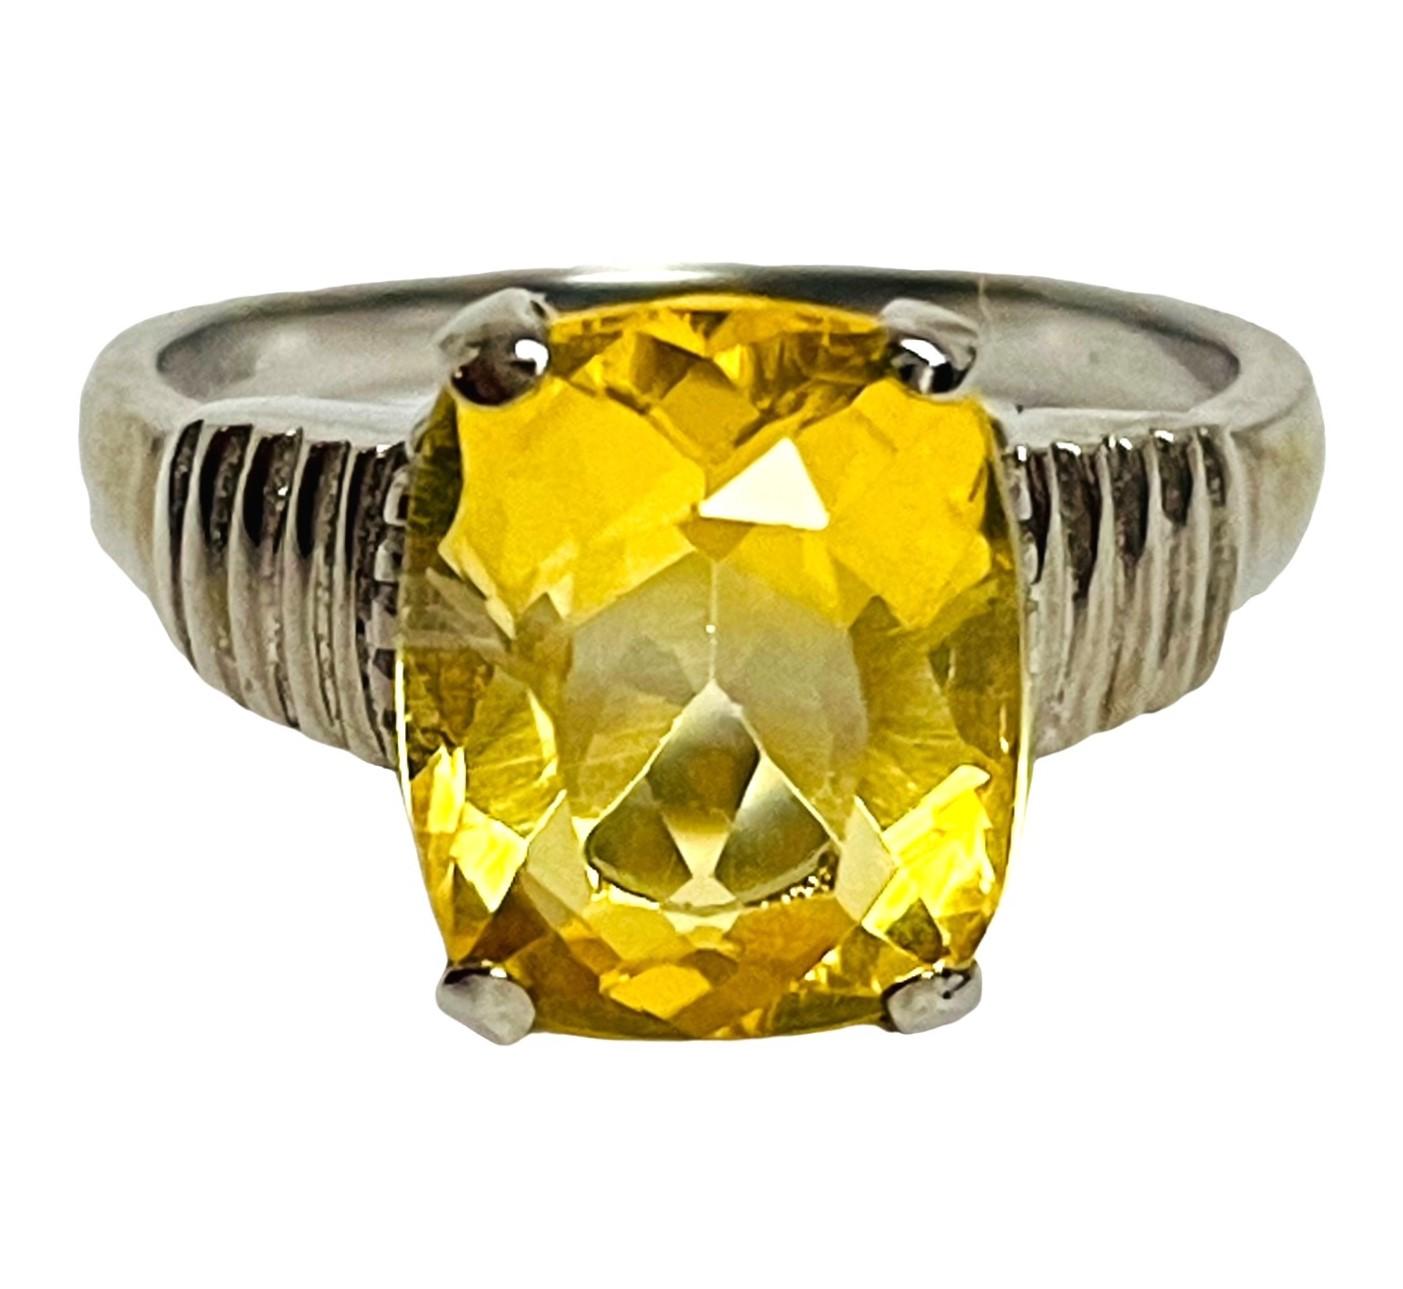 The stone is natural and has not been enhanced in any way.  Beautiful statement ring for sure.  The stone s 10.78 x 8.7 mm. The stone is 3.4 carats.  The ring itself is 13.78 ctw.   Total weight in grams is 2.85 grams.  It will be sure to get